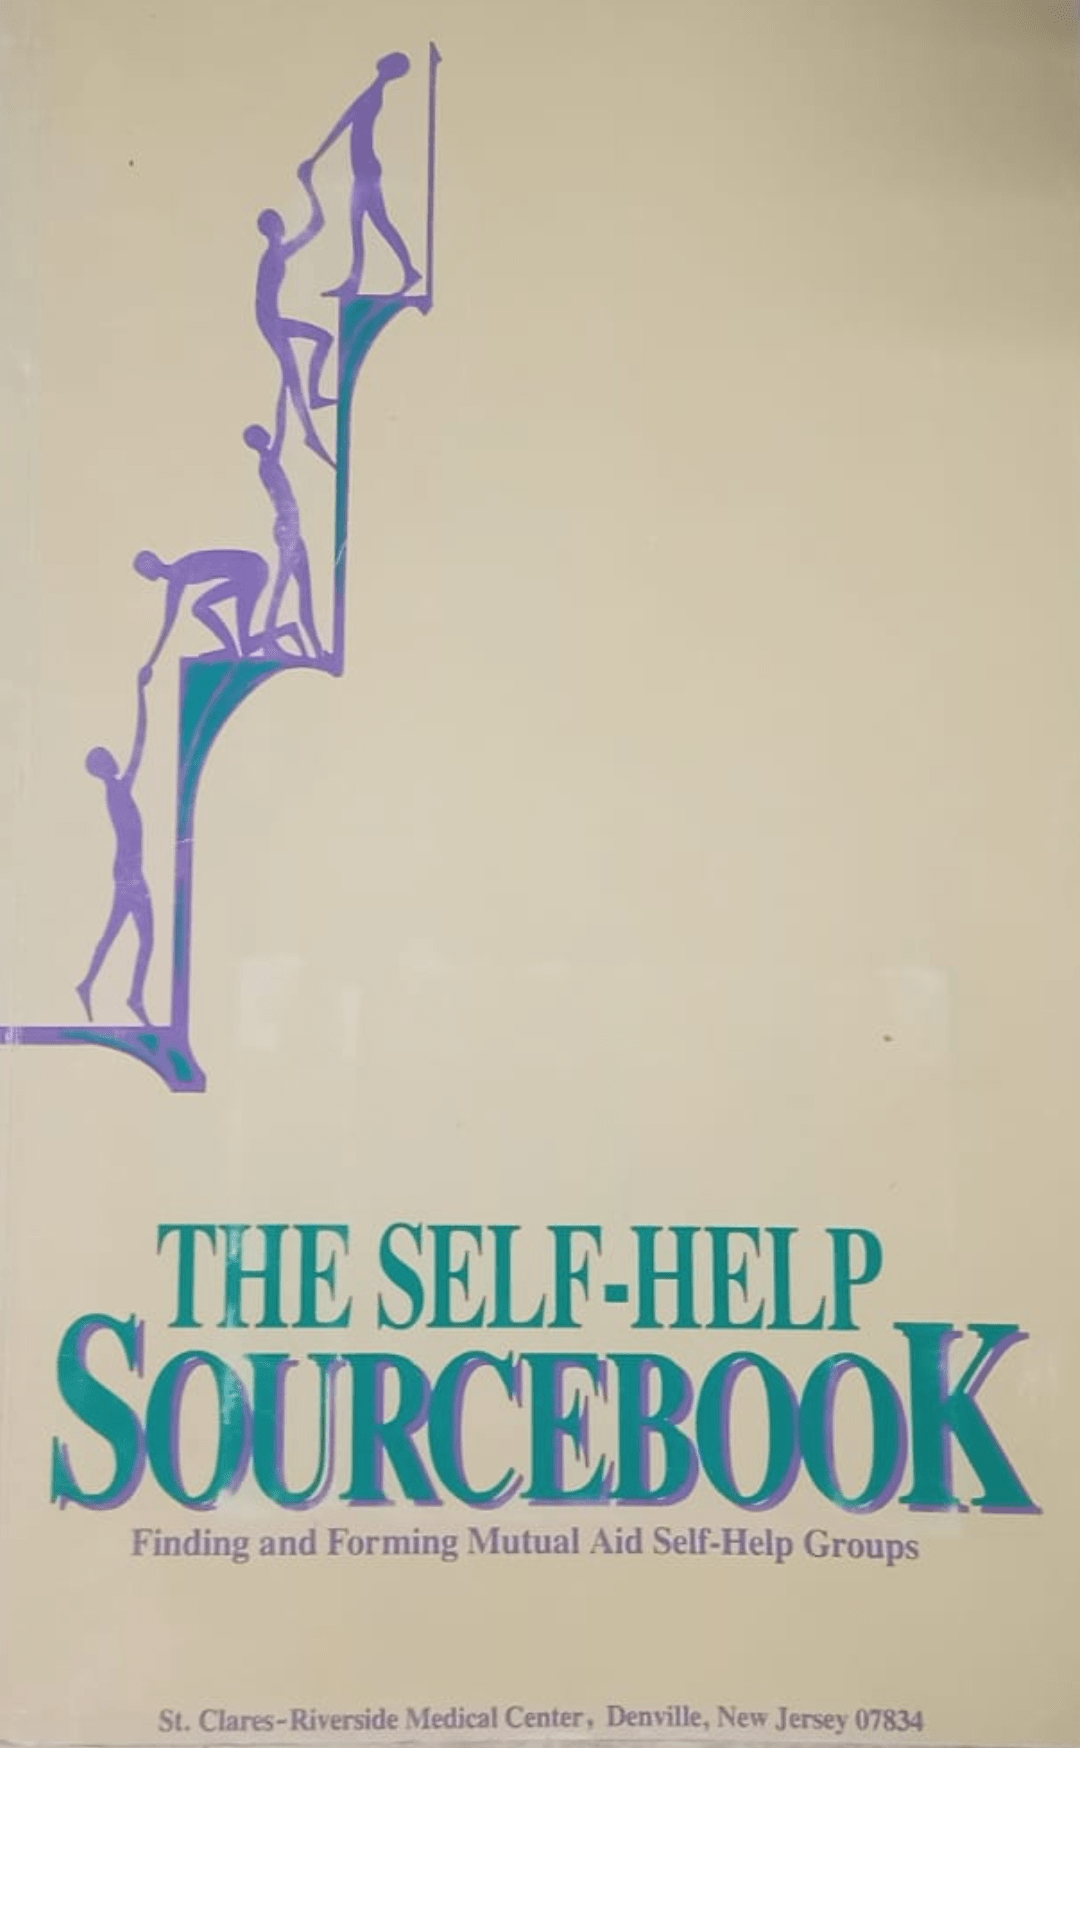 The Self-Help Sourcebook: Finding andForming Mutual Aid Self-Help Groups